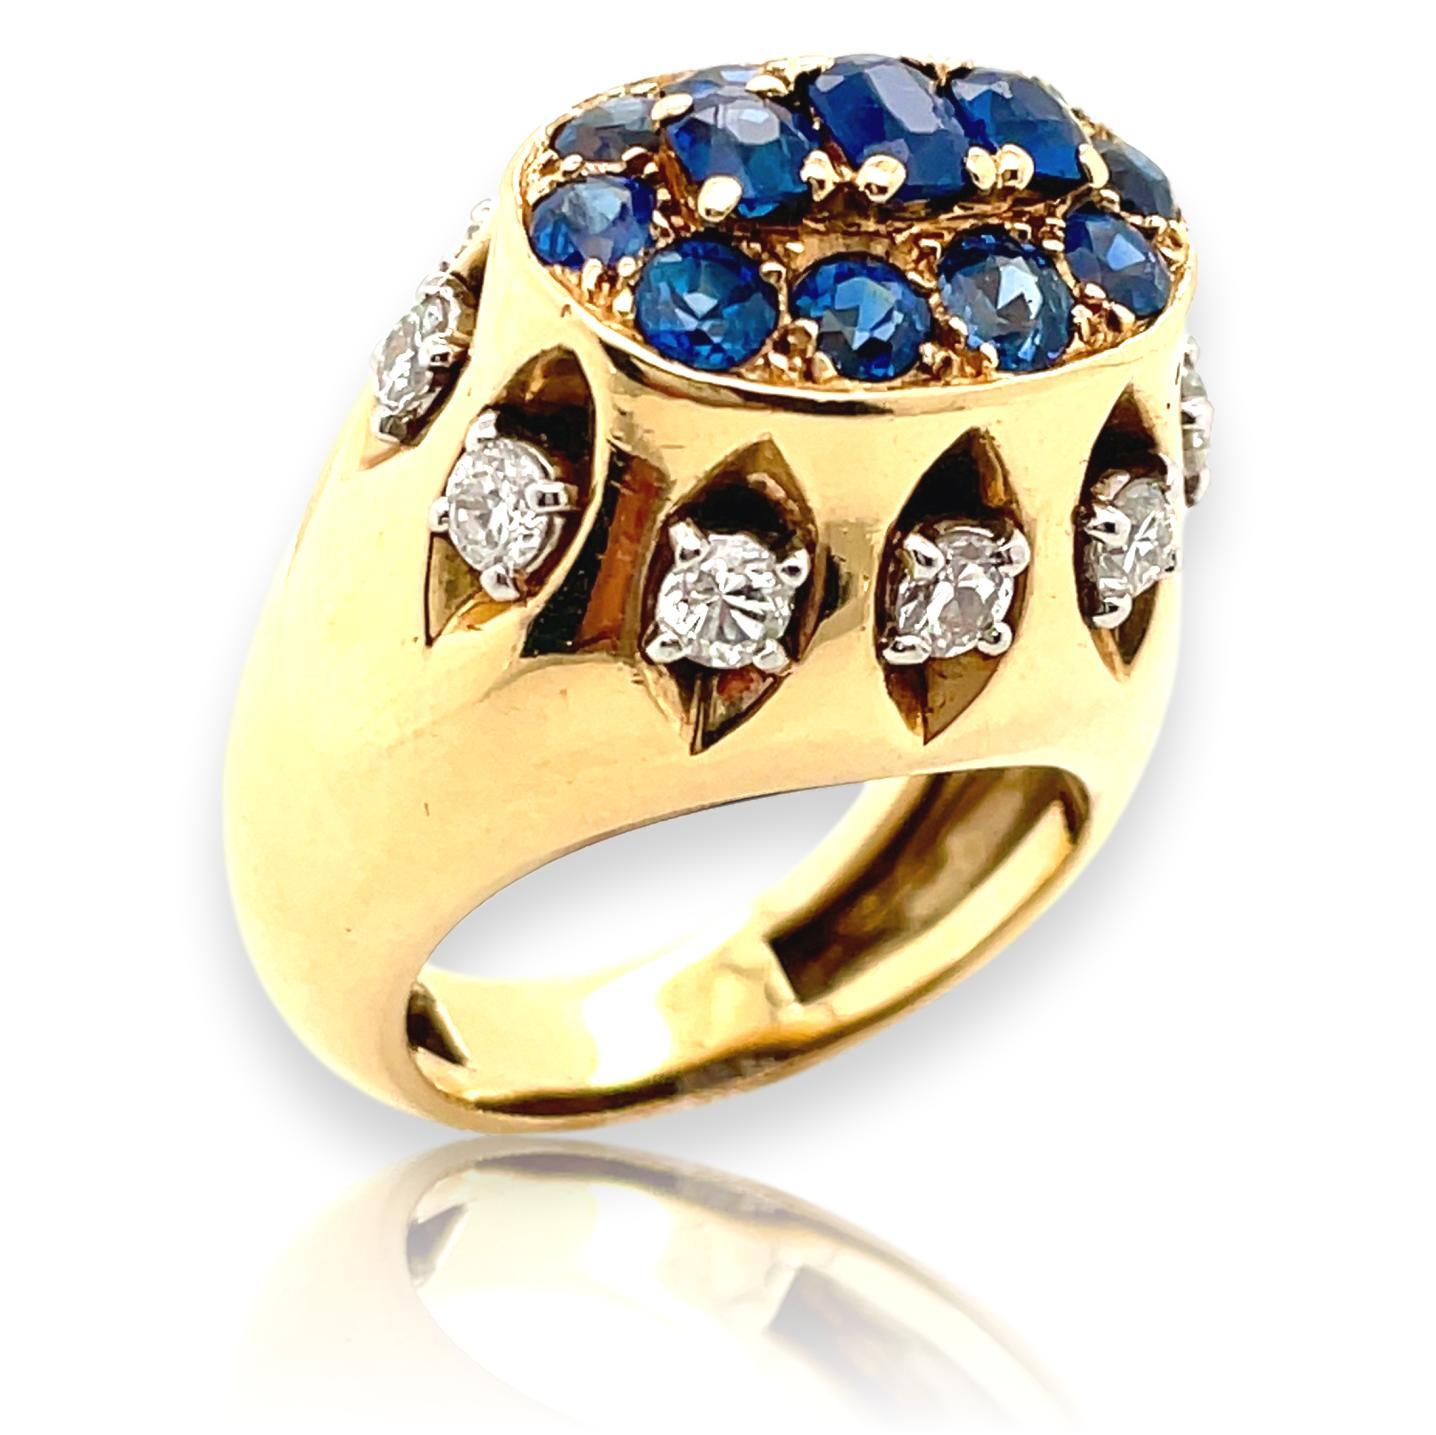 Sapphire and Diamond Cocktail Ring by Cartier France. The 1